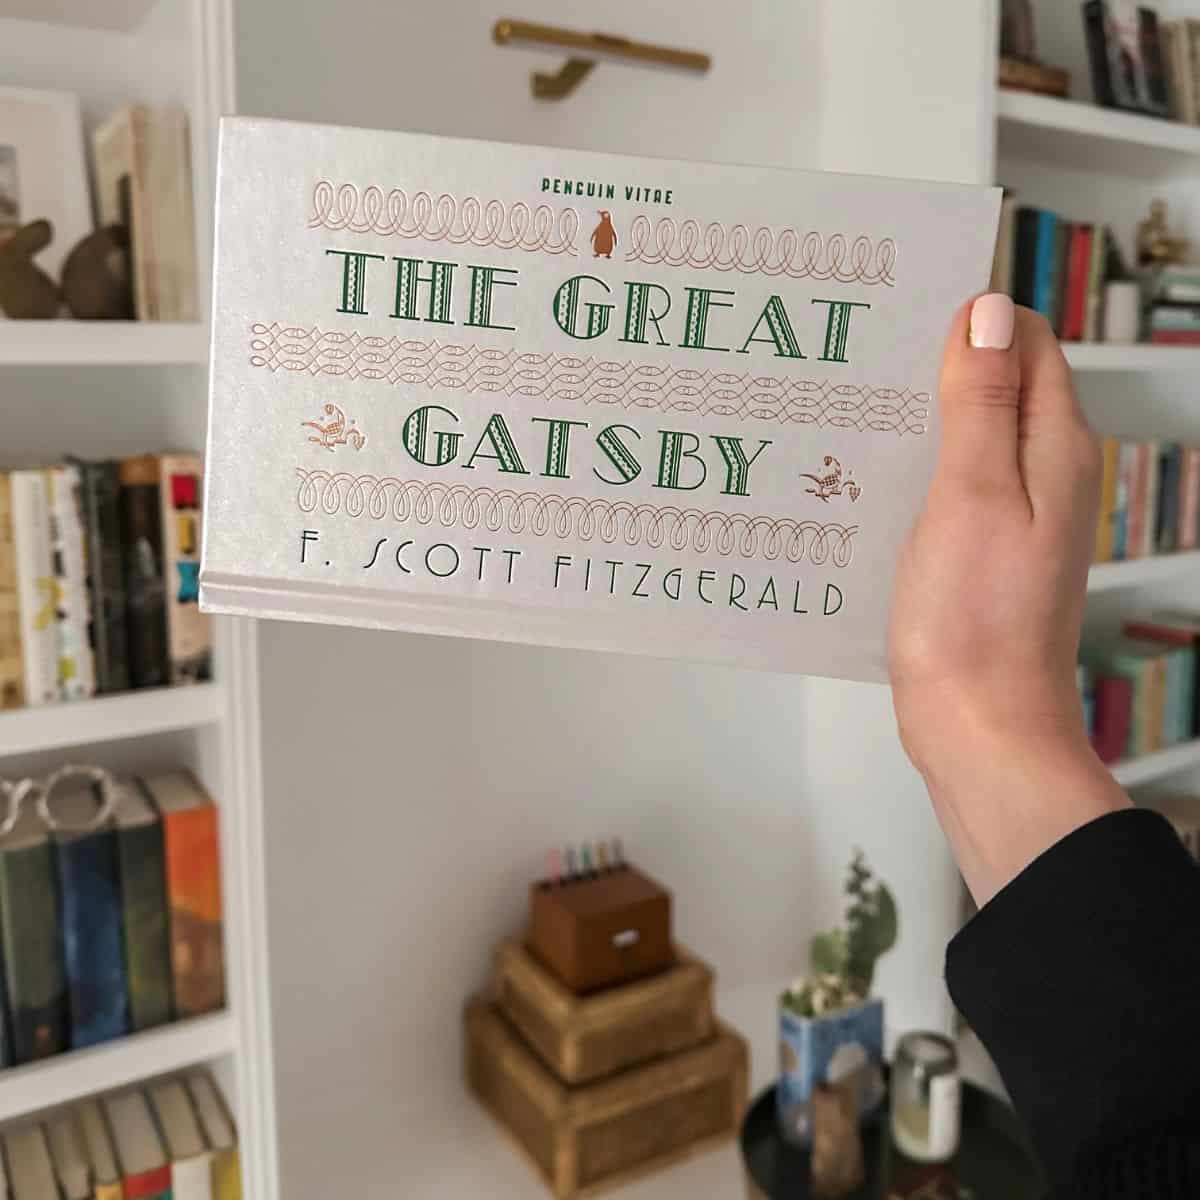 45 Jay Gatsby Quotes from The Great Gatsby (With Chapter Numbers)